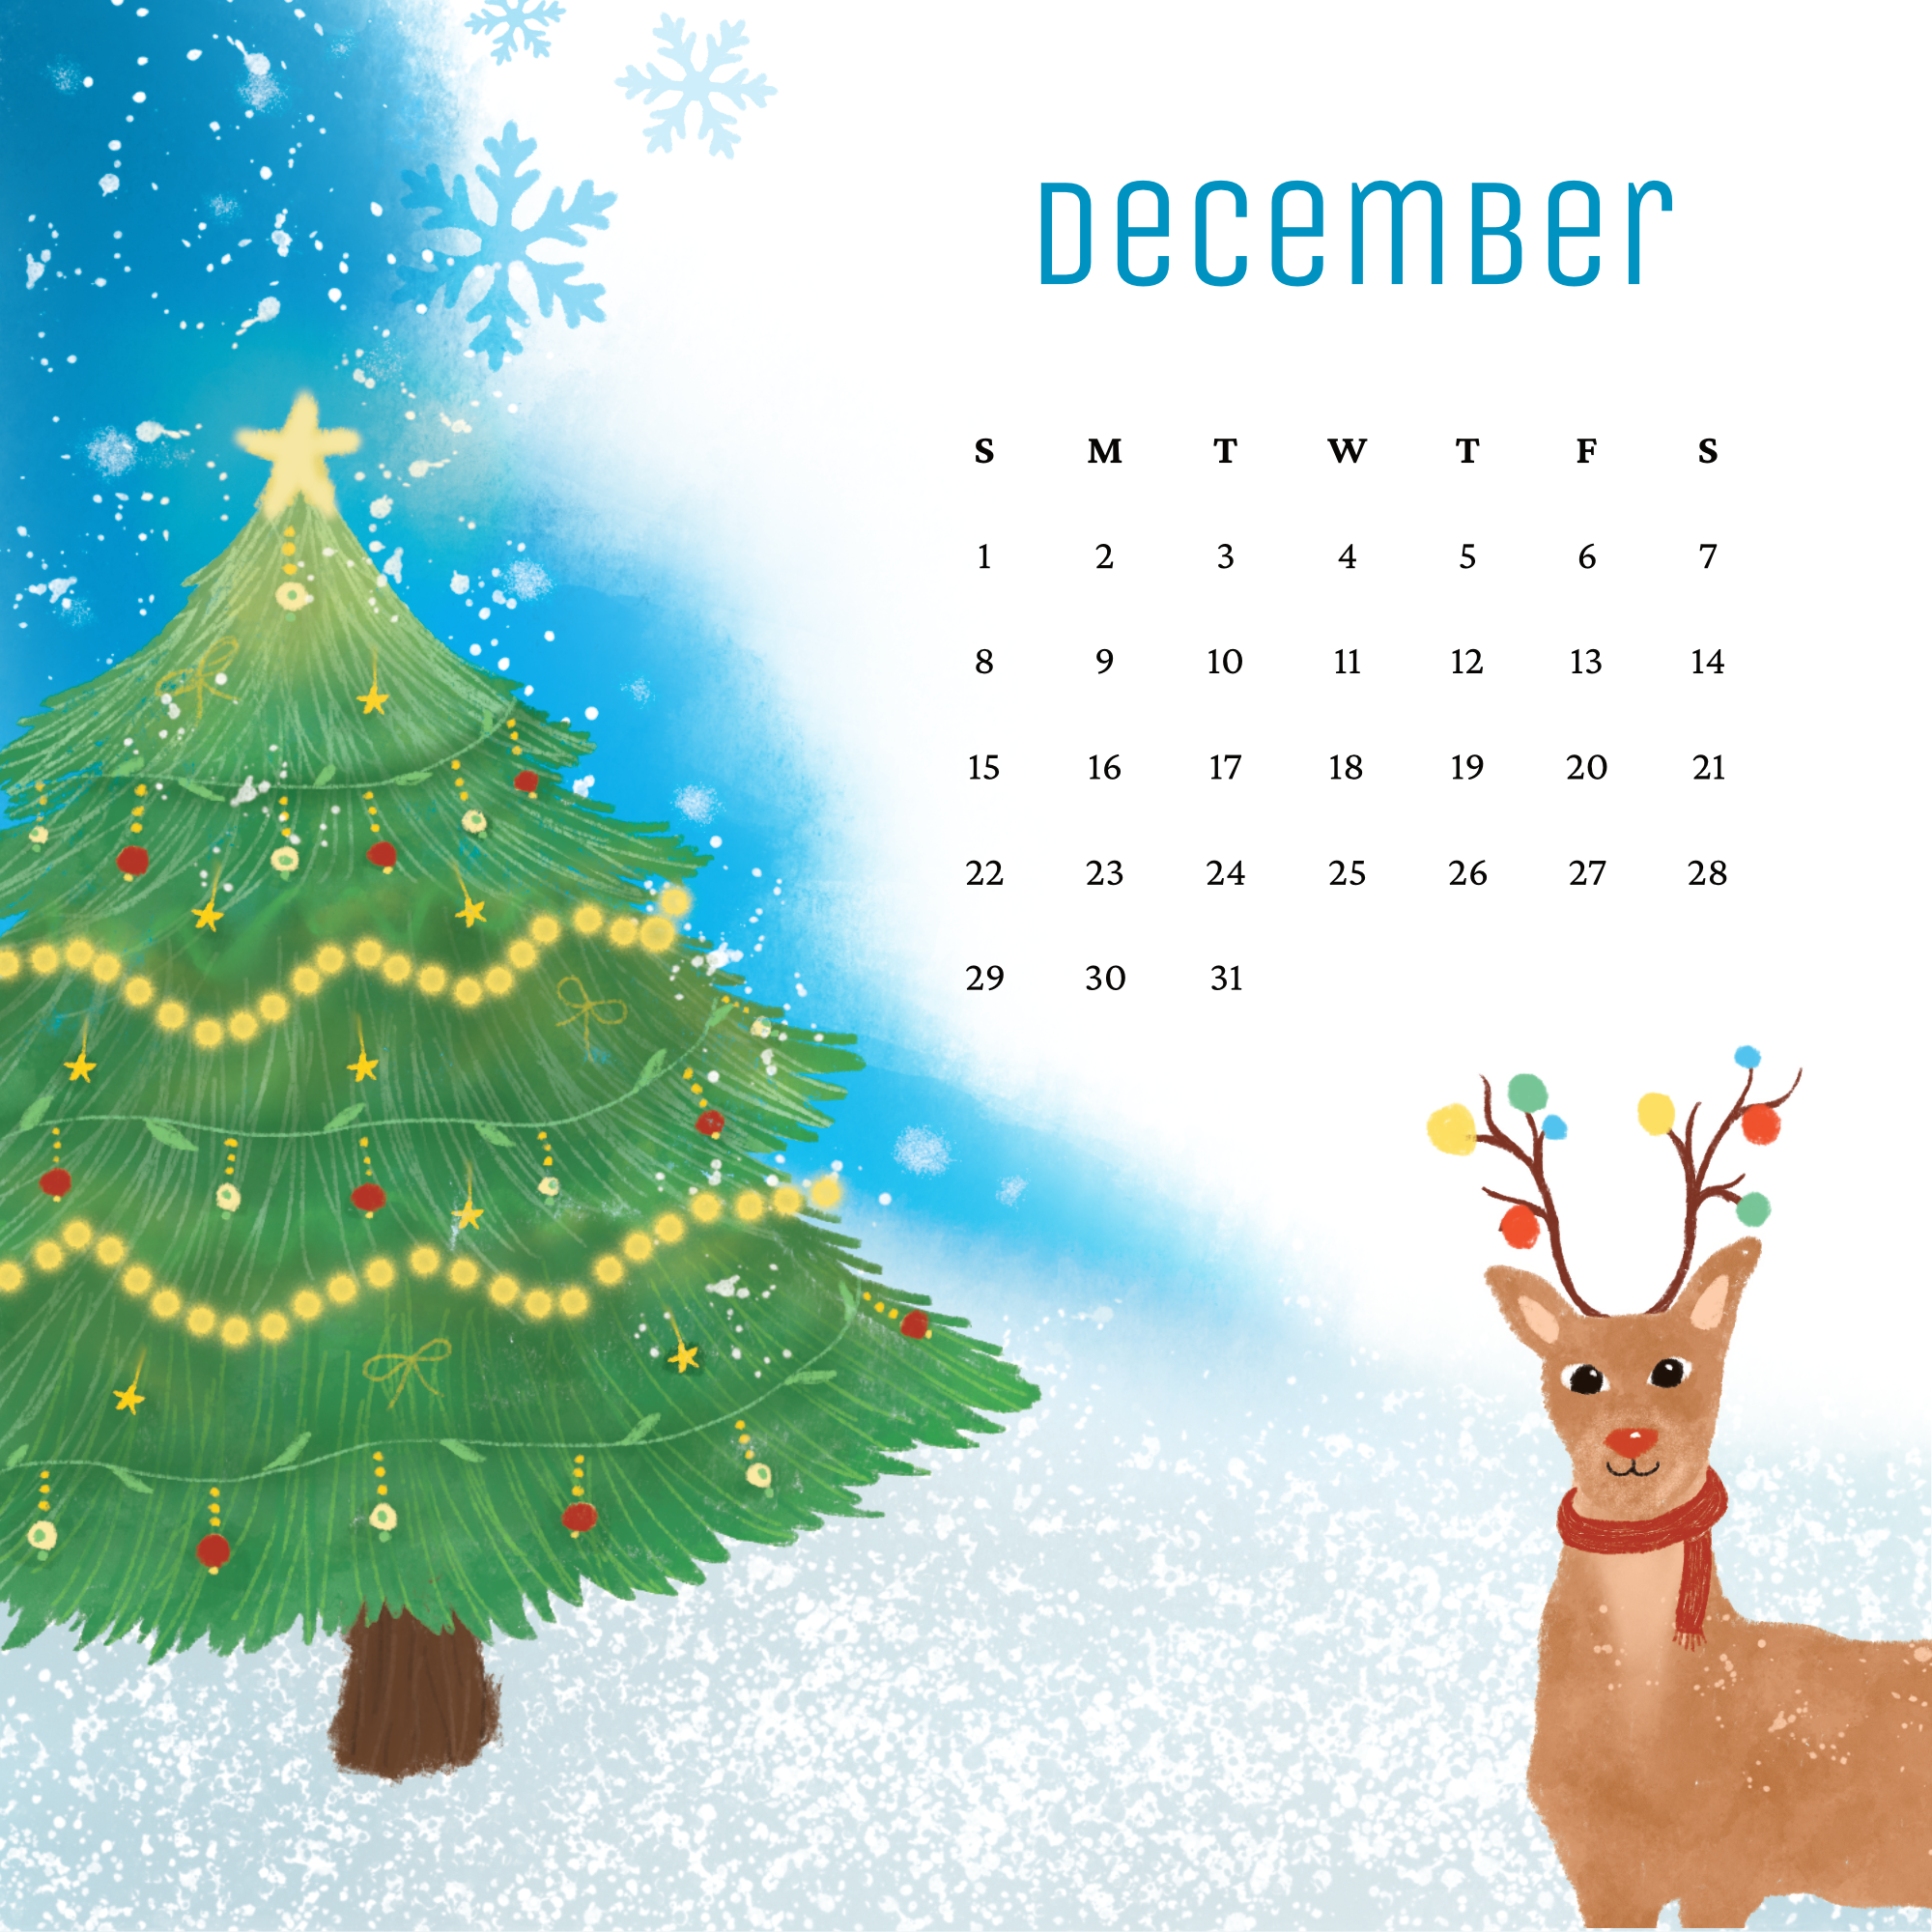 A cute reindeer and a beautifully decorated christmas tree. This is the christmas themed illustration of a calendar for the month of December.